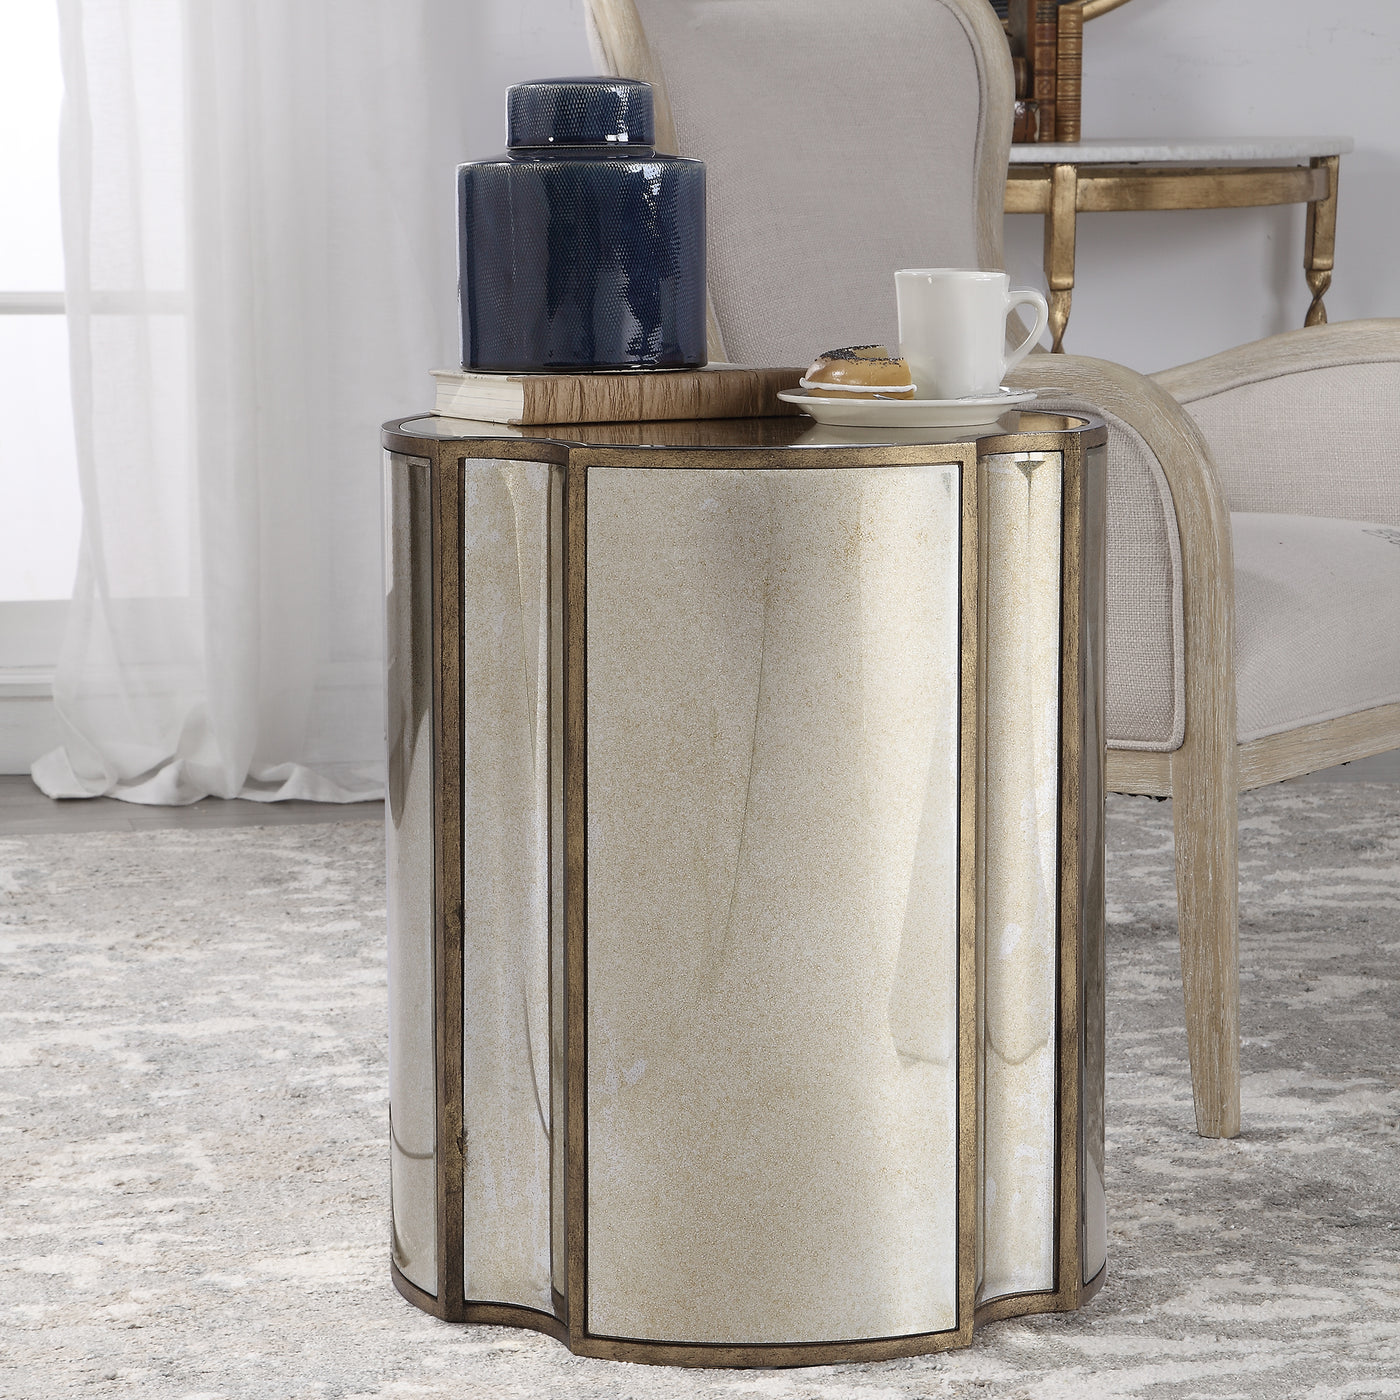 Add Unique Style To A Space With This Quatrefoil Designed Accent Table. Each Facet Features A Curved Antique Mirror Surrou...